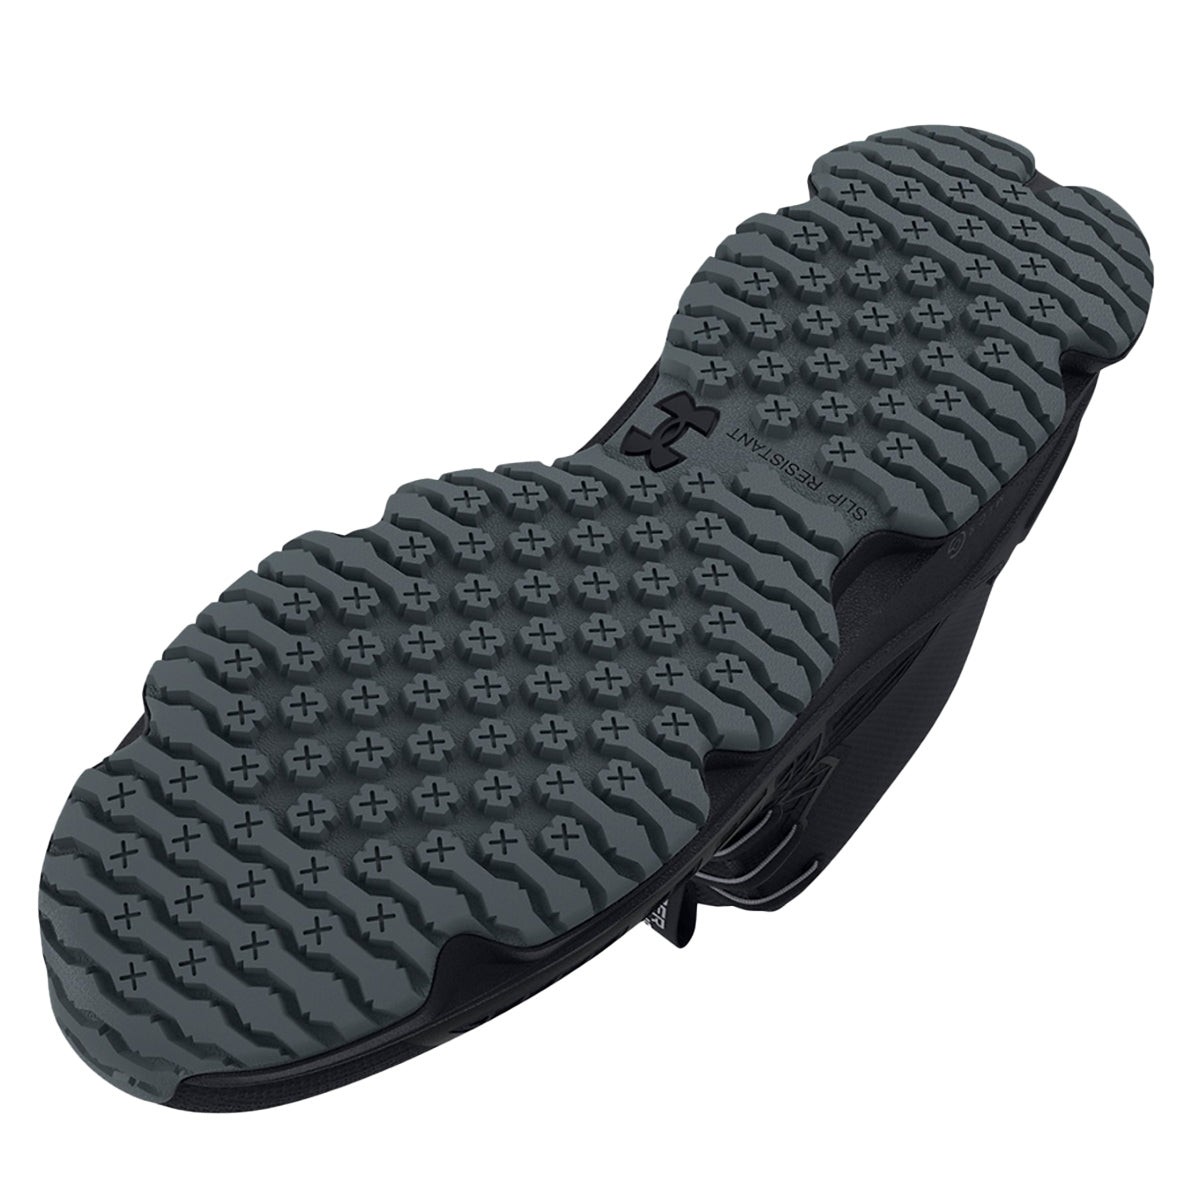 Under Armour Micro G Strikefast Tactical Shoes